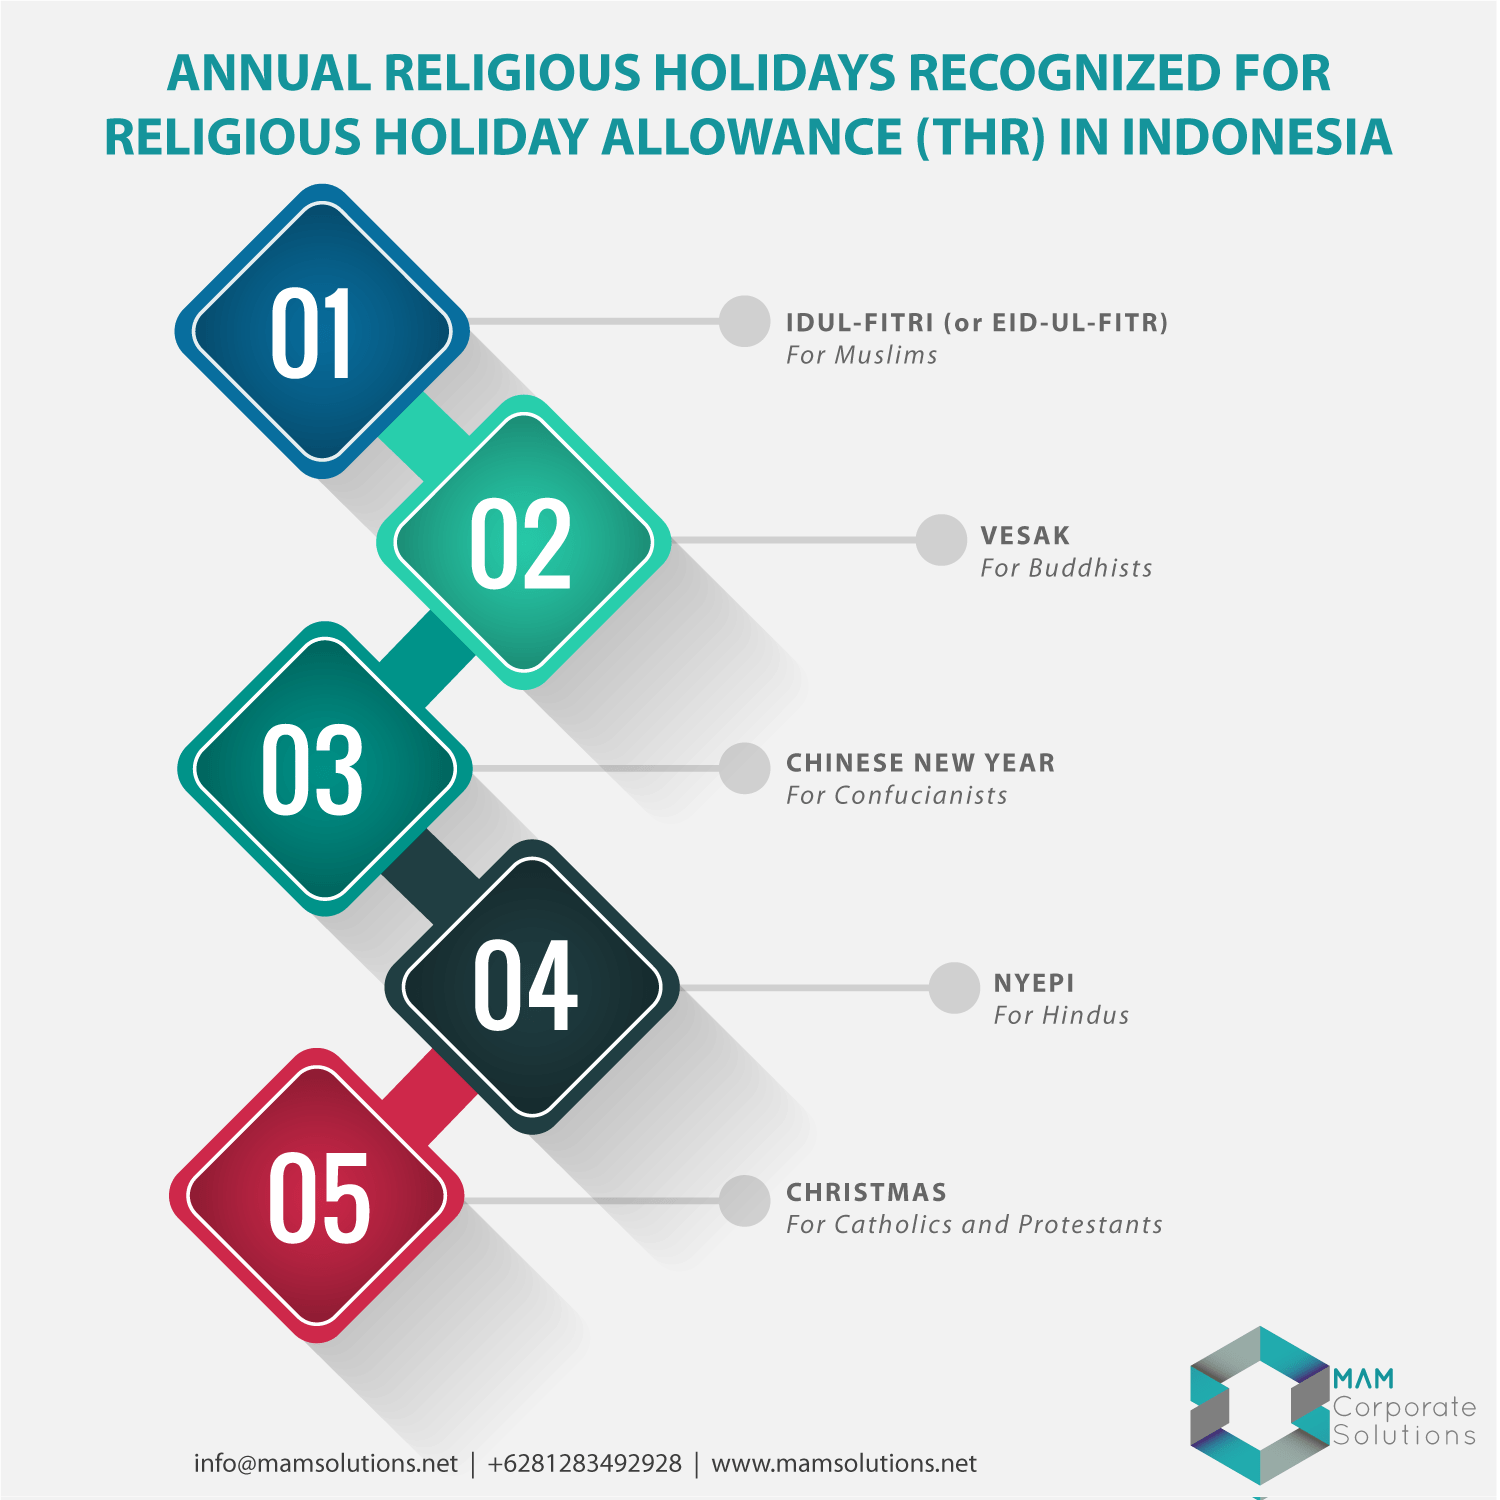 Religious Holiday Allowance (THR) in Indonesia MAM Corporate Solutions